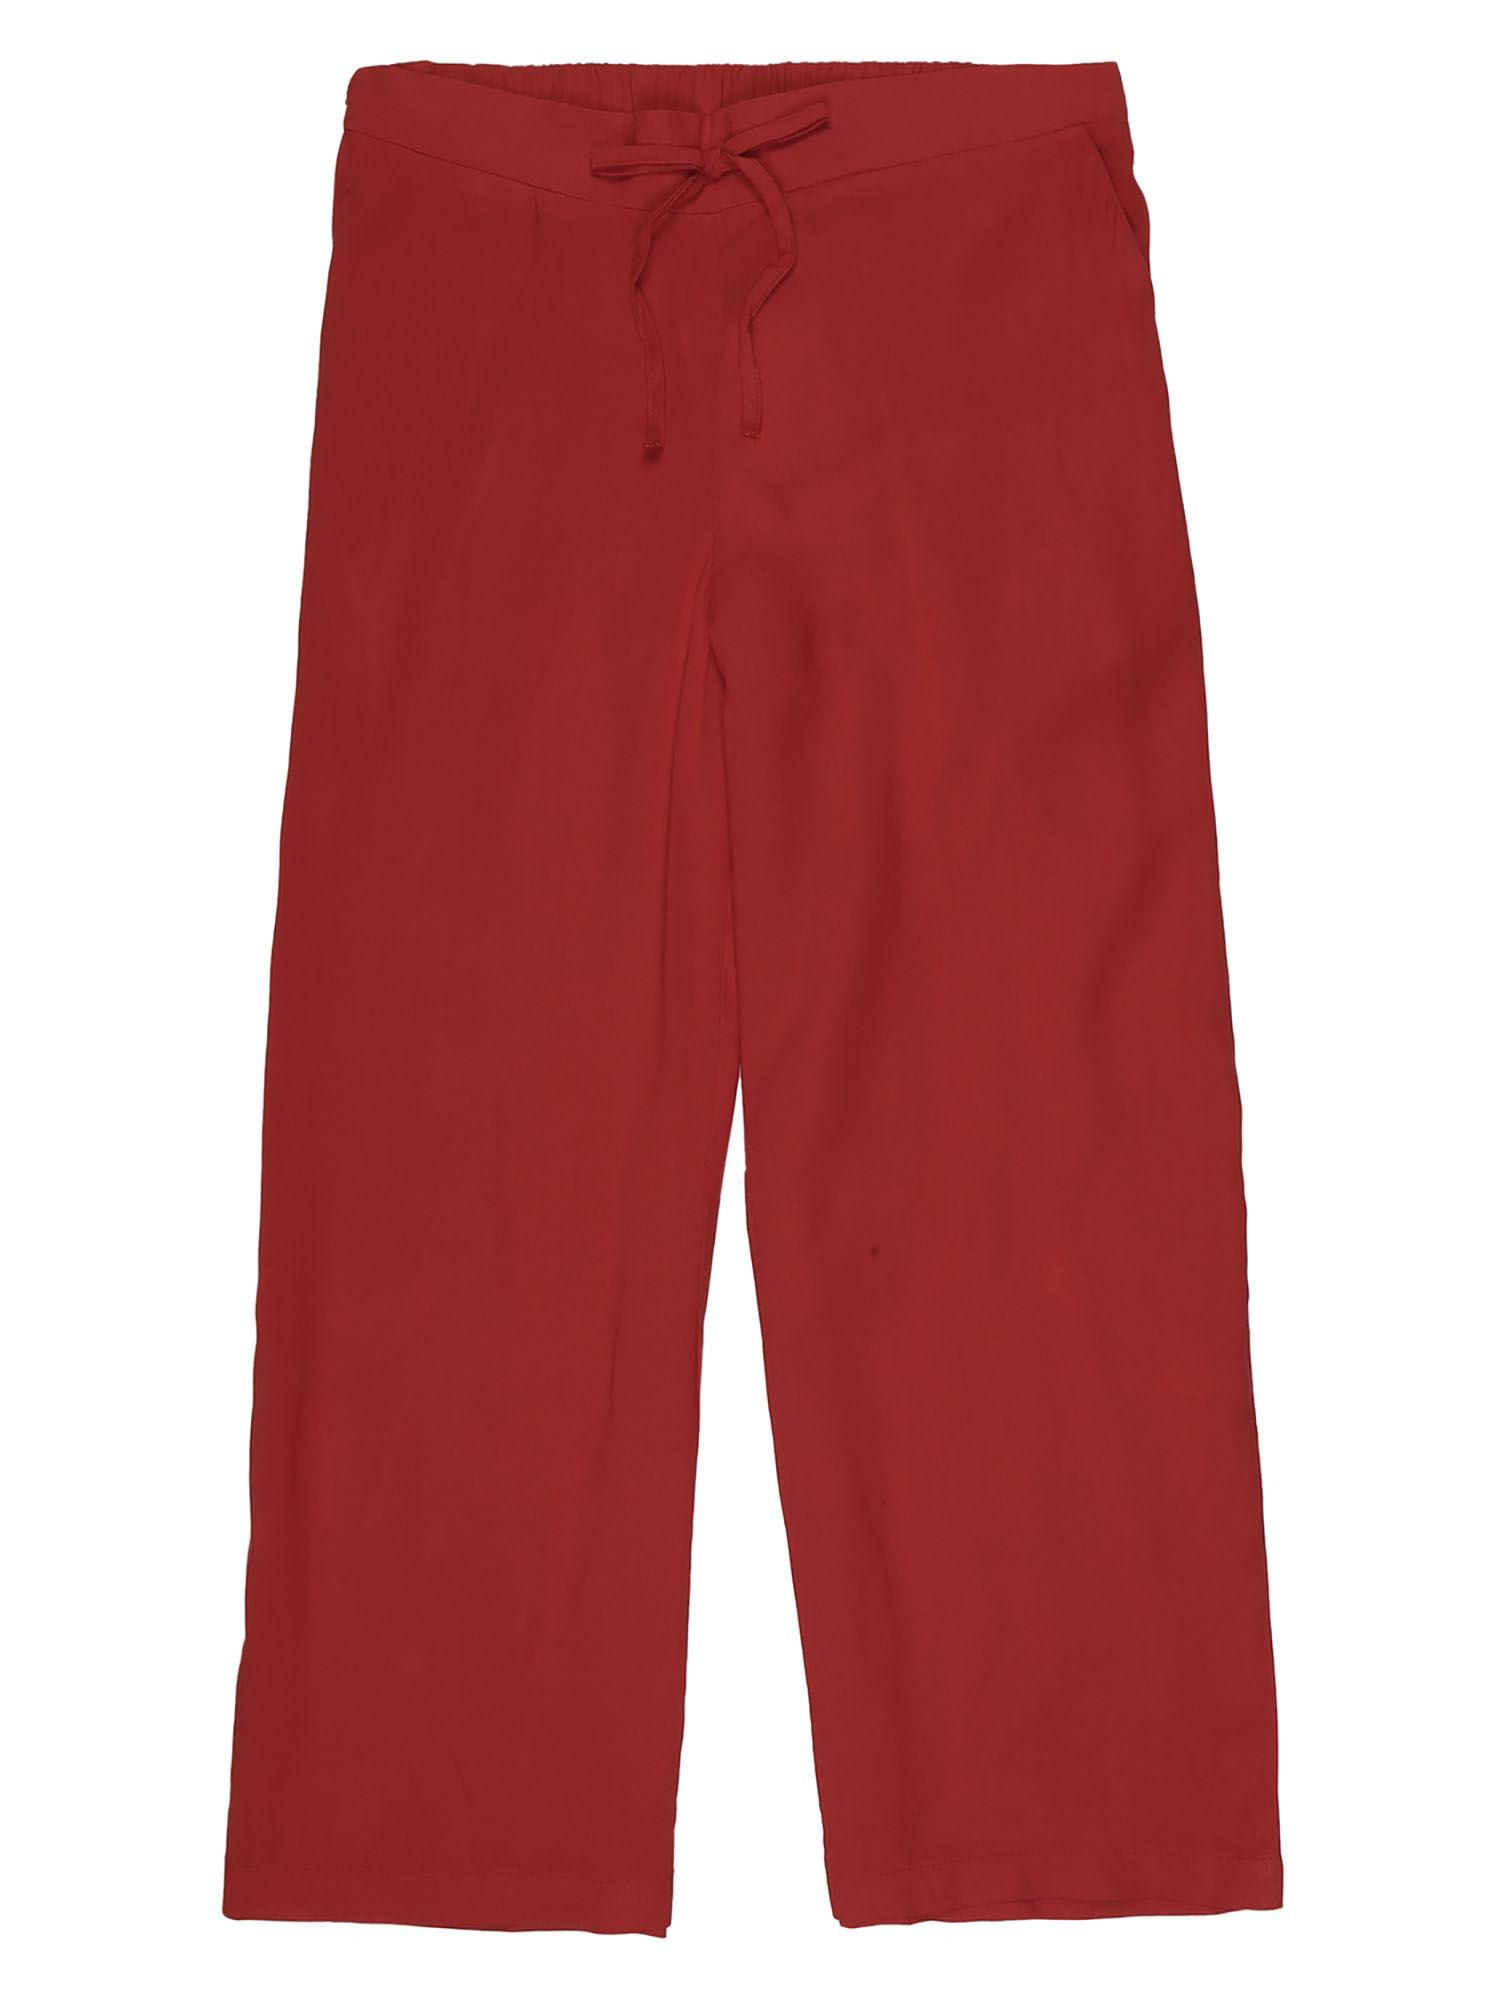 girls red trousers